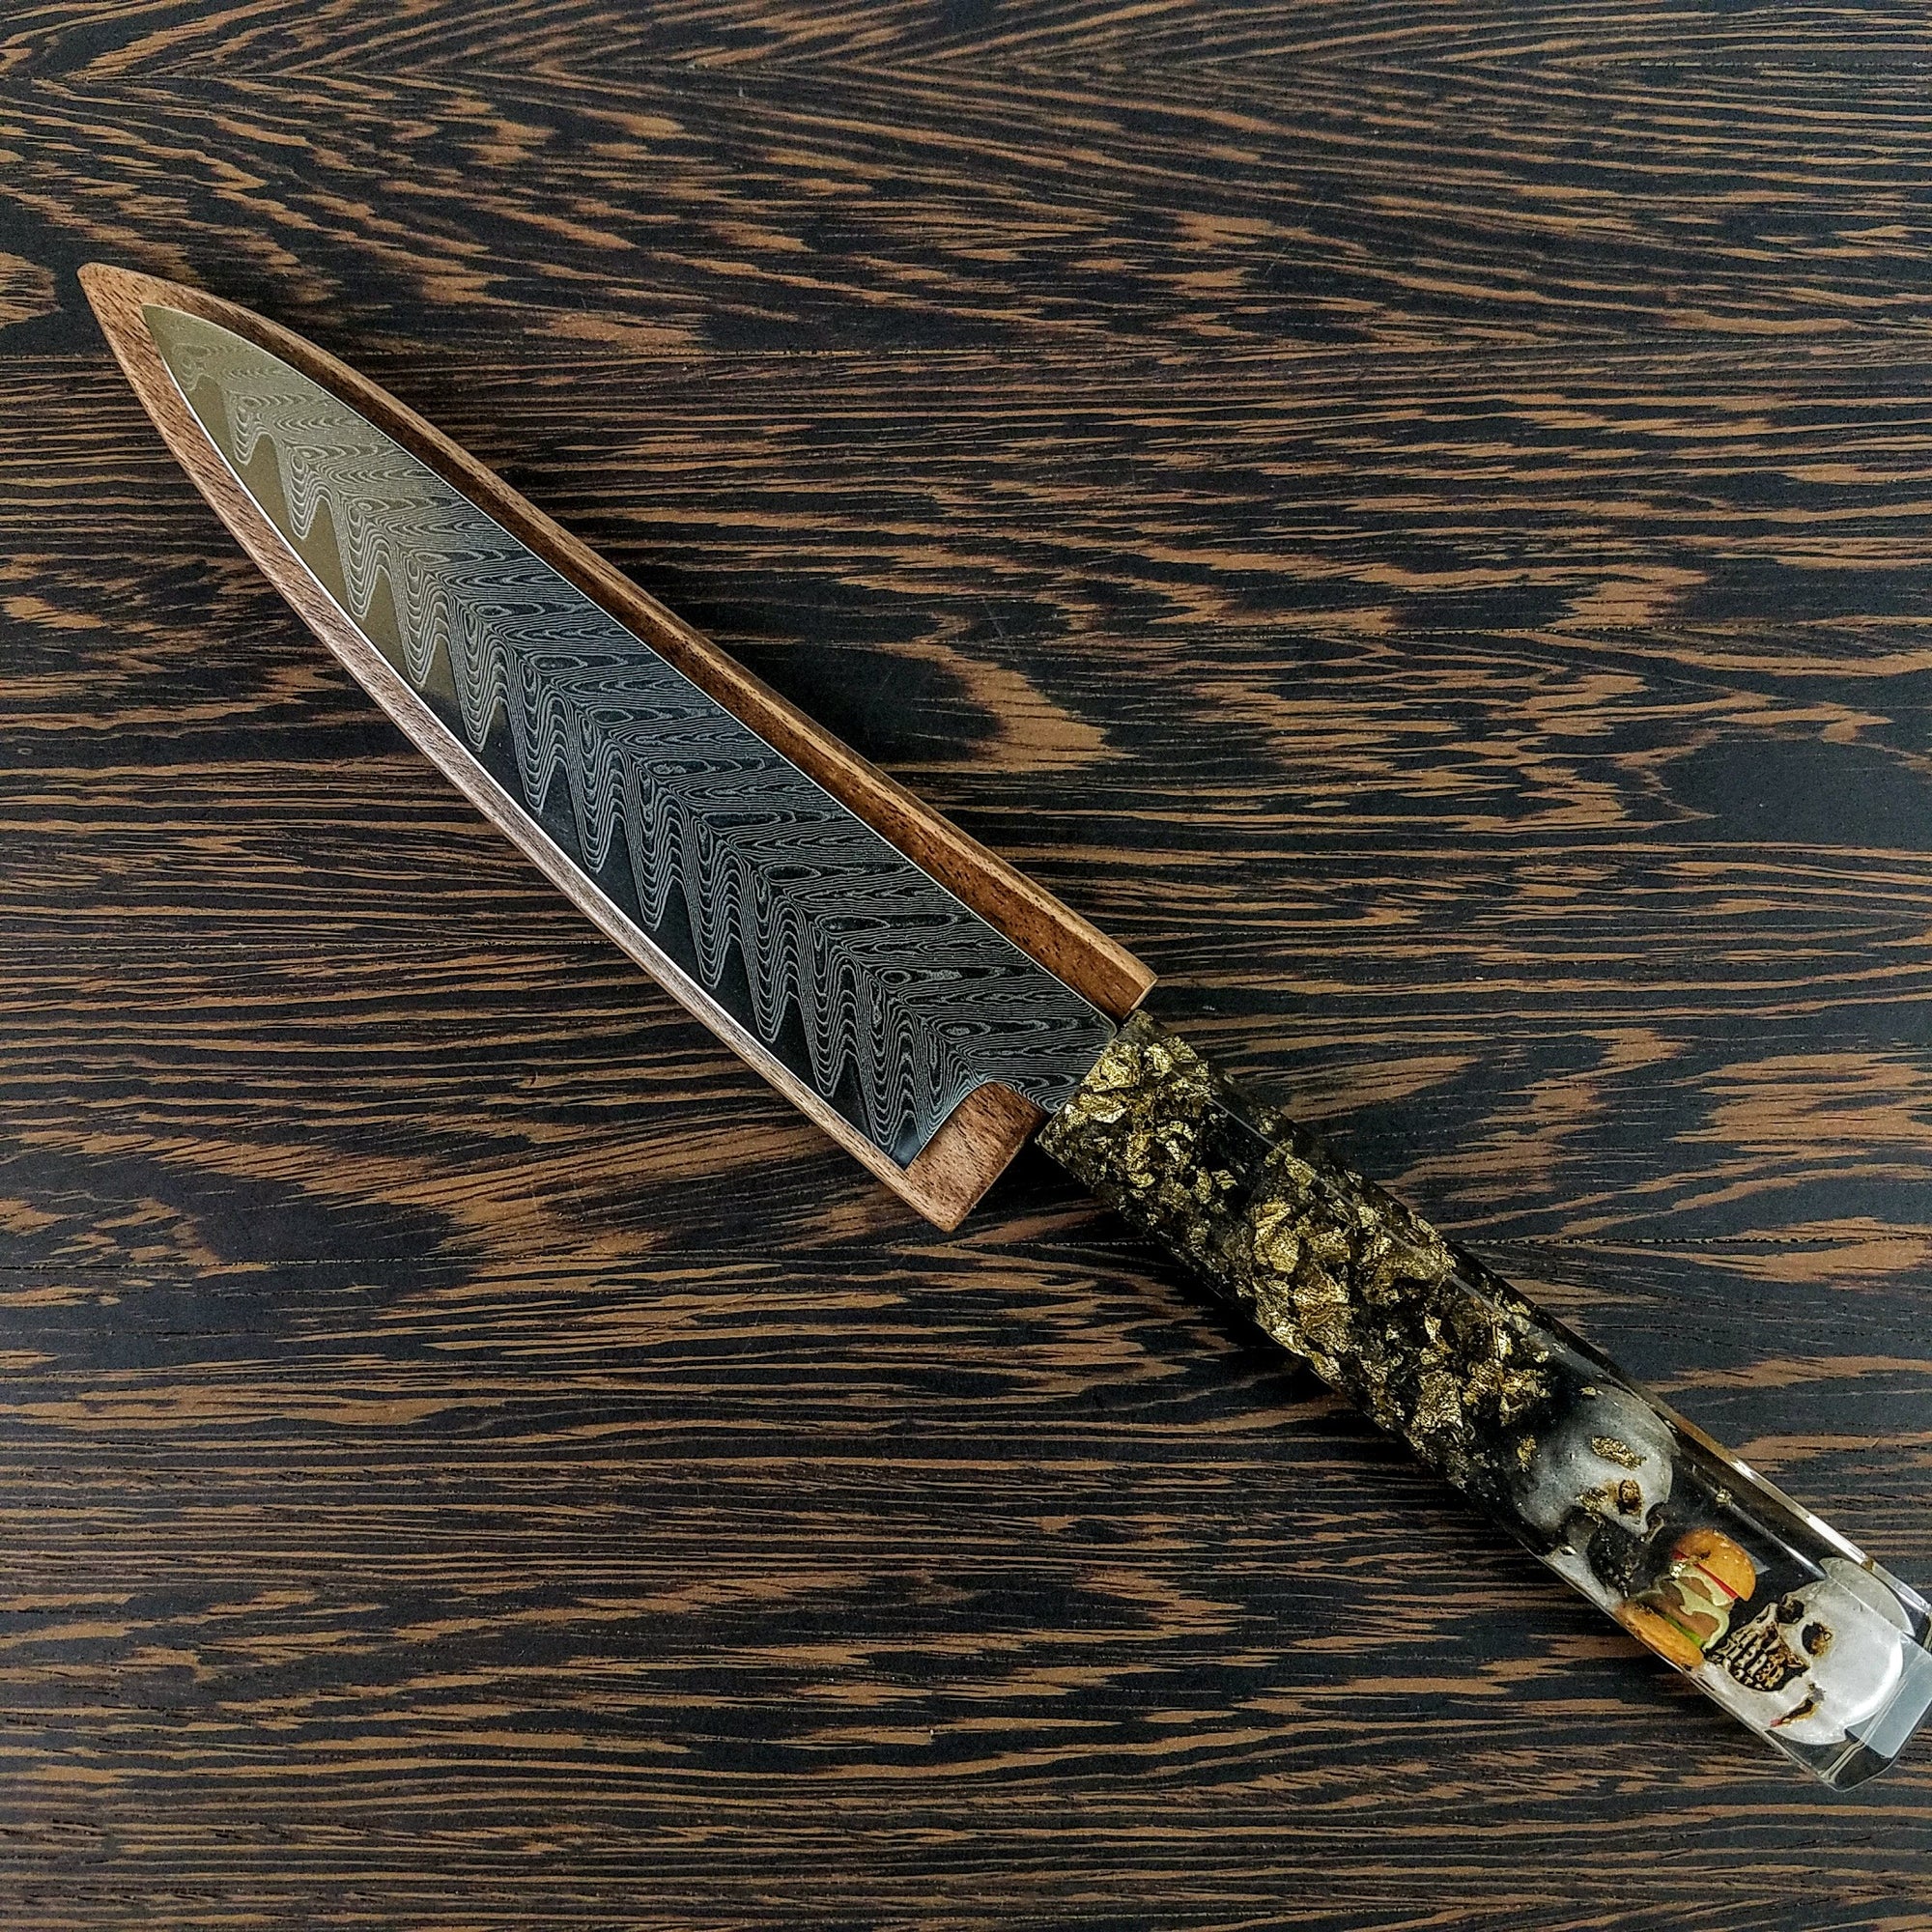 Dirty Double Decker - 6in (150mm) Damascus Petty Culinary Knife